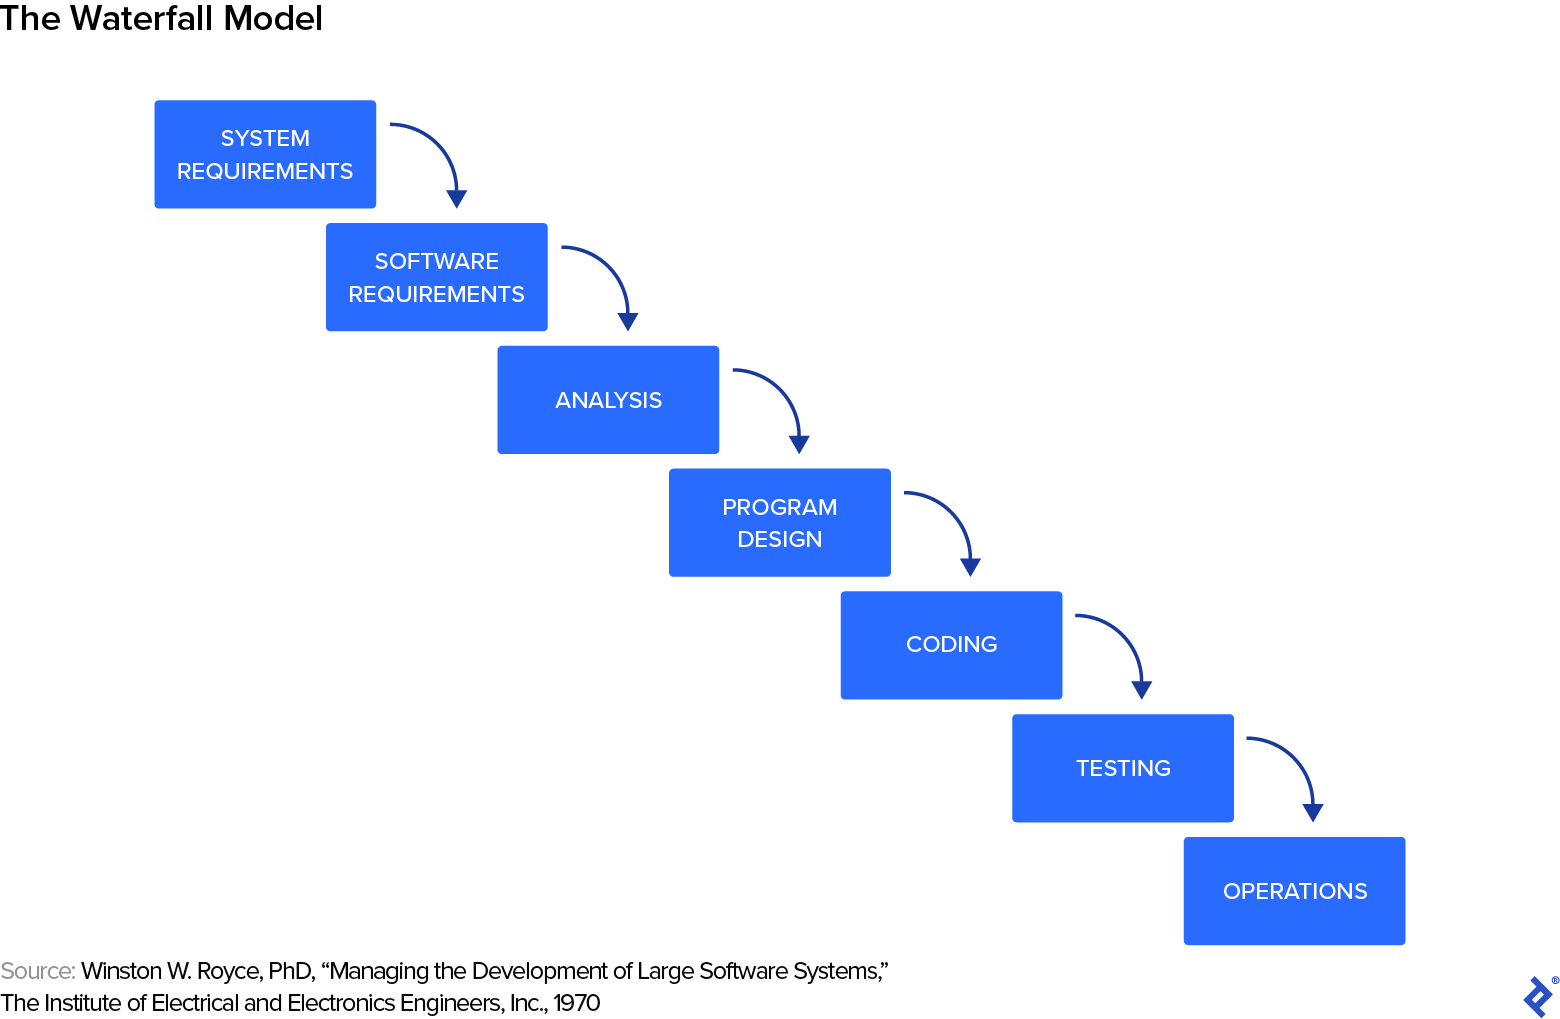 The Waterfall model, a series of steps from System Requirements, Software Requirements, Analysis, Program Design, Coding, Testing, to Operations.